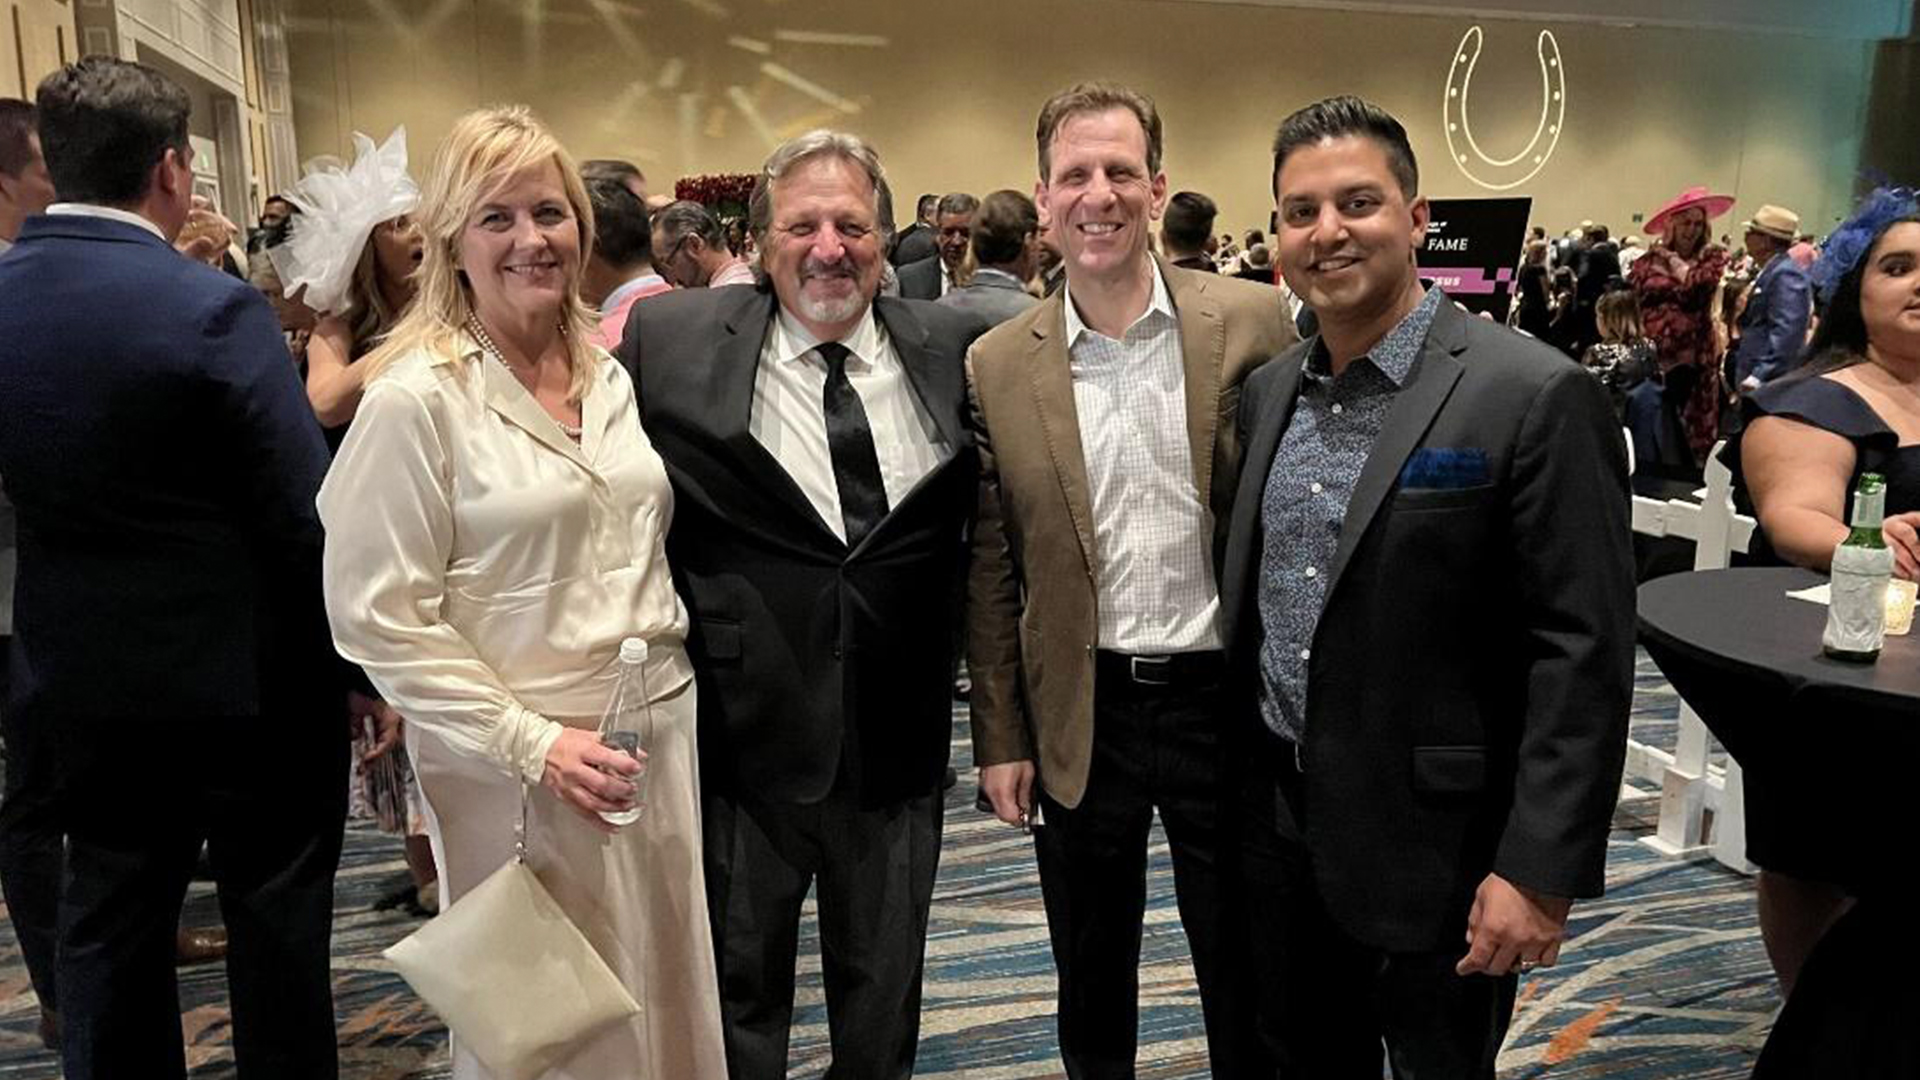 Winter Park Mergers & Acquisitions firm attends UCF College of Business Hall of Fame